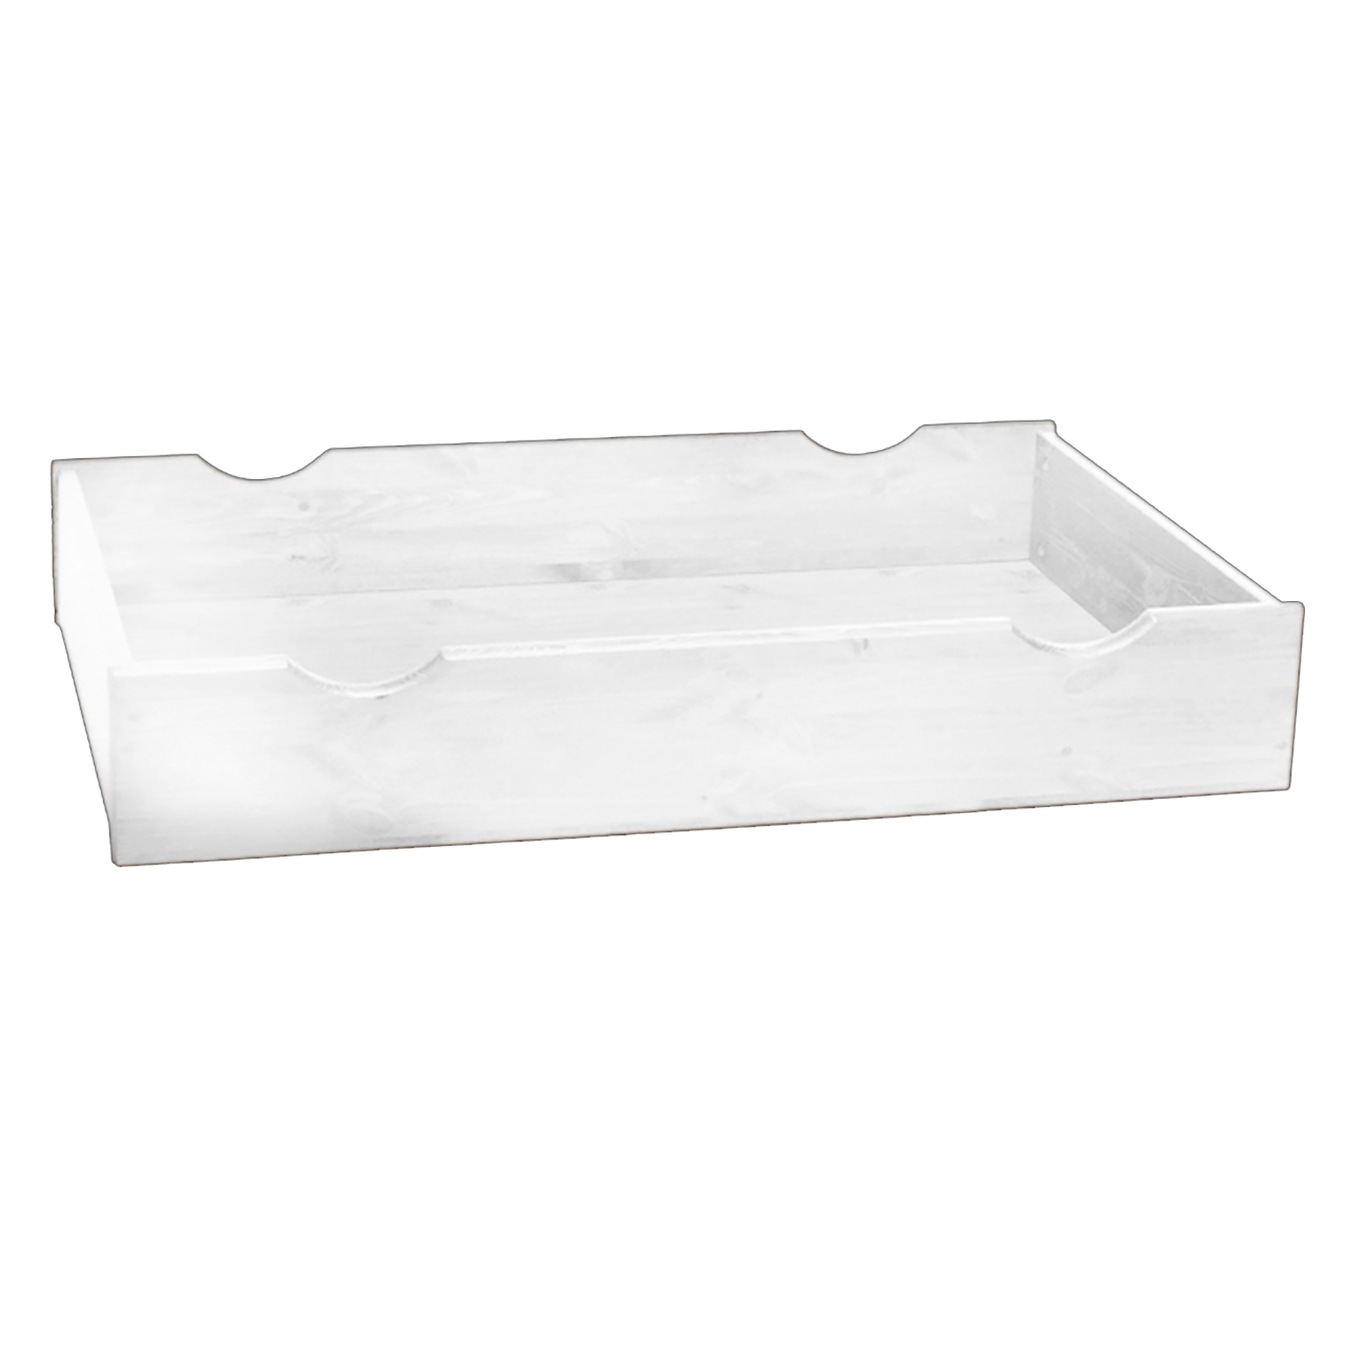 Vejby Under Bed Storage, White Lacquer